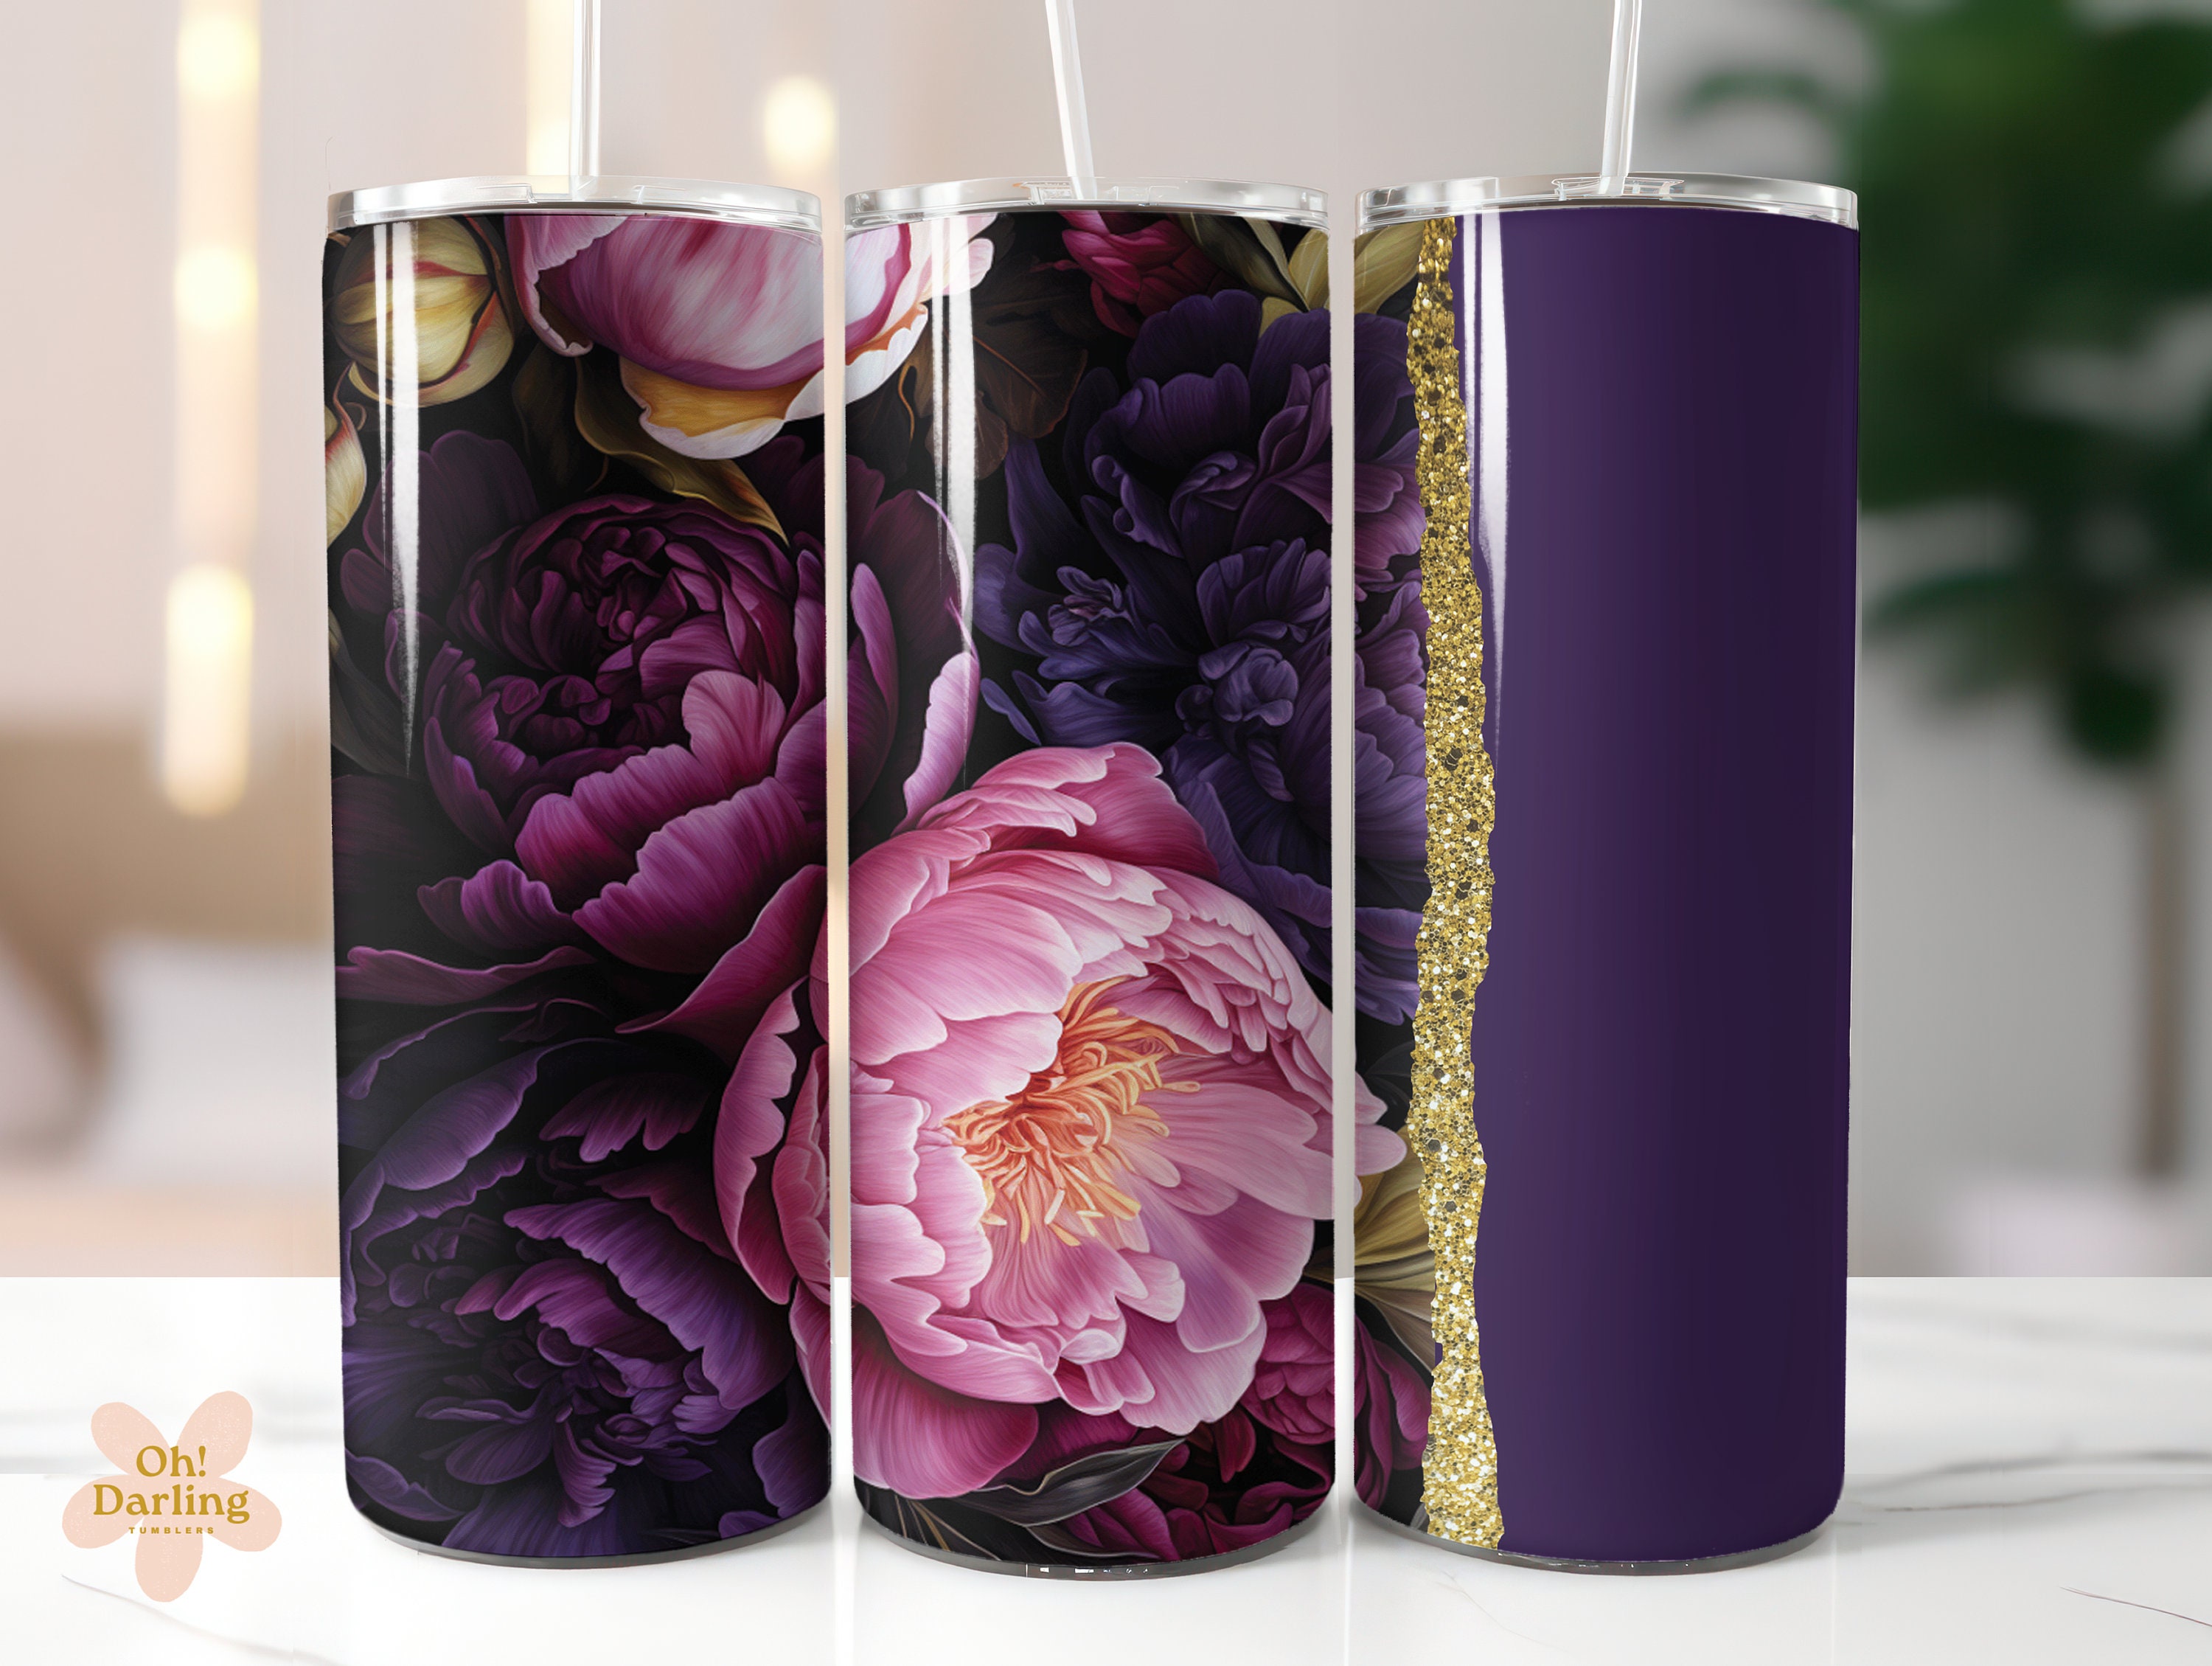 Peony Pattern Wrapping Paper Roll Pink Flower Peony Wedding Flower